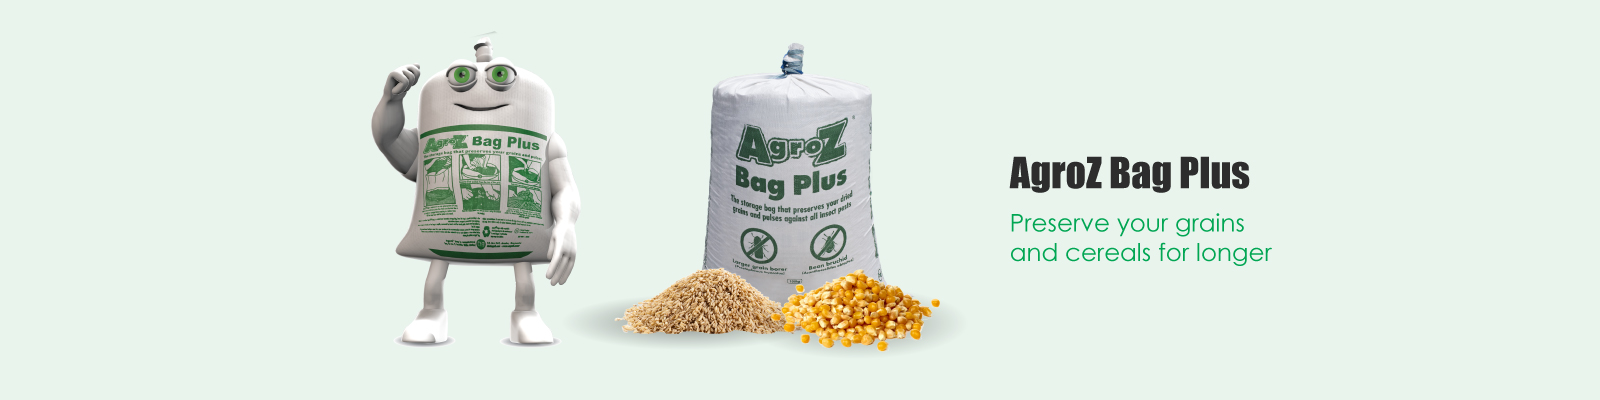 agroz bag plus - preserve your grains and cereals for longer